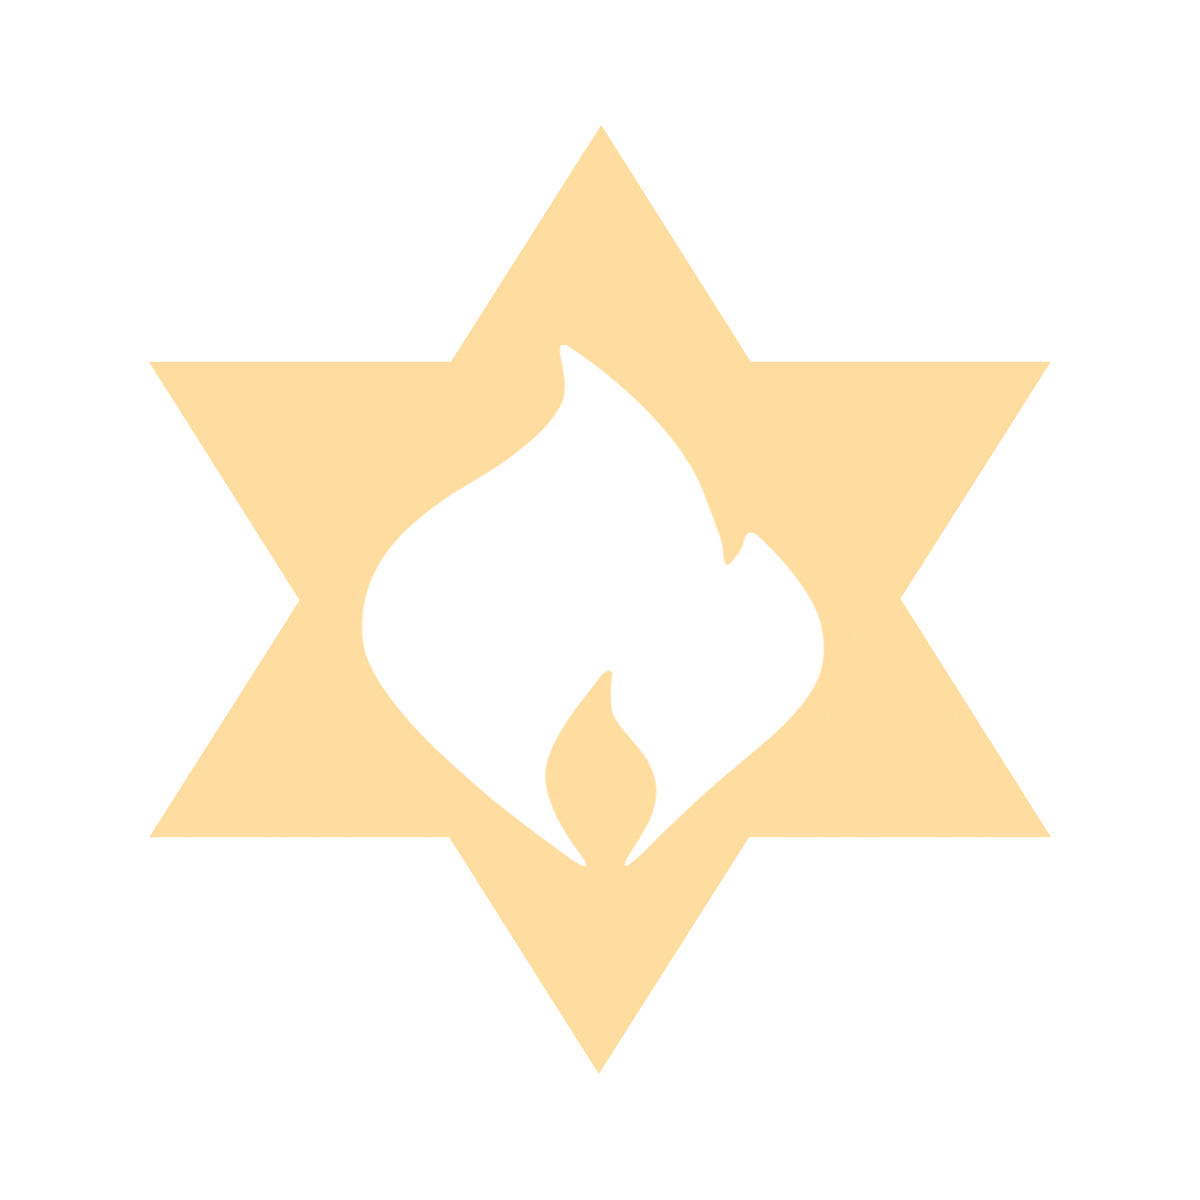 The City Congregation for Humanistic Judaism